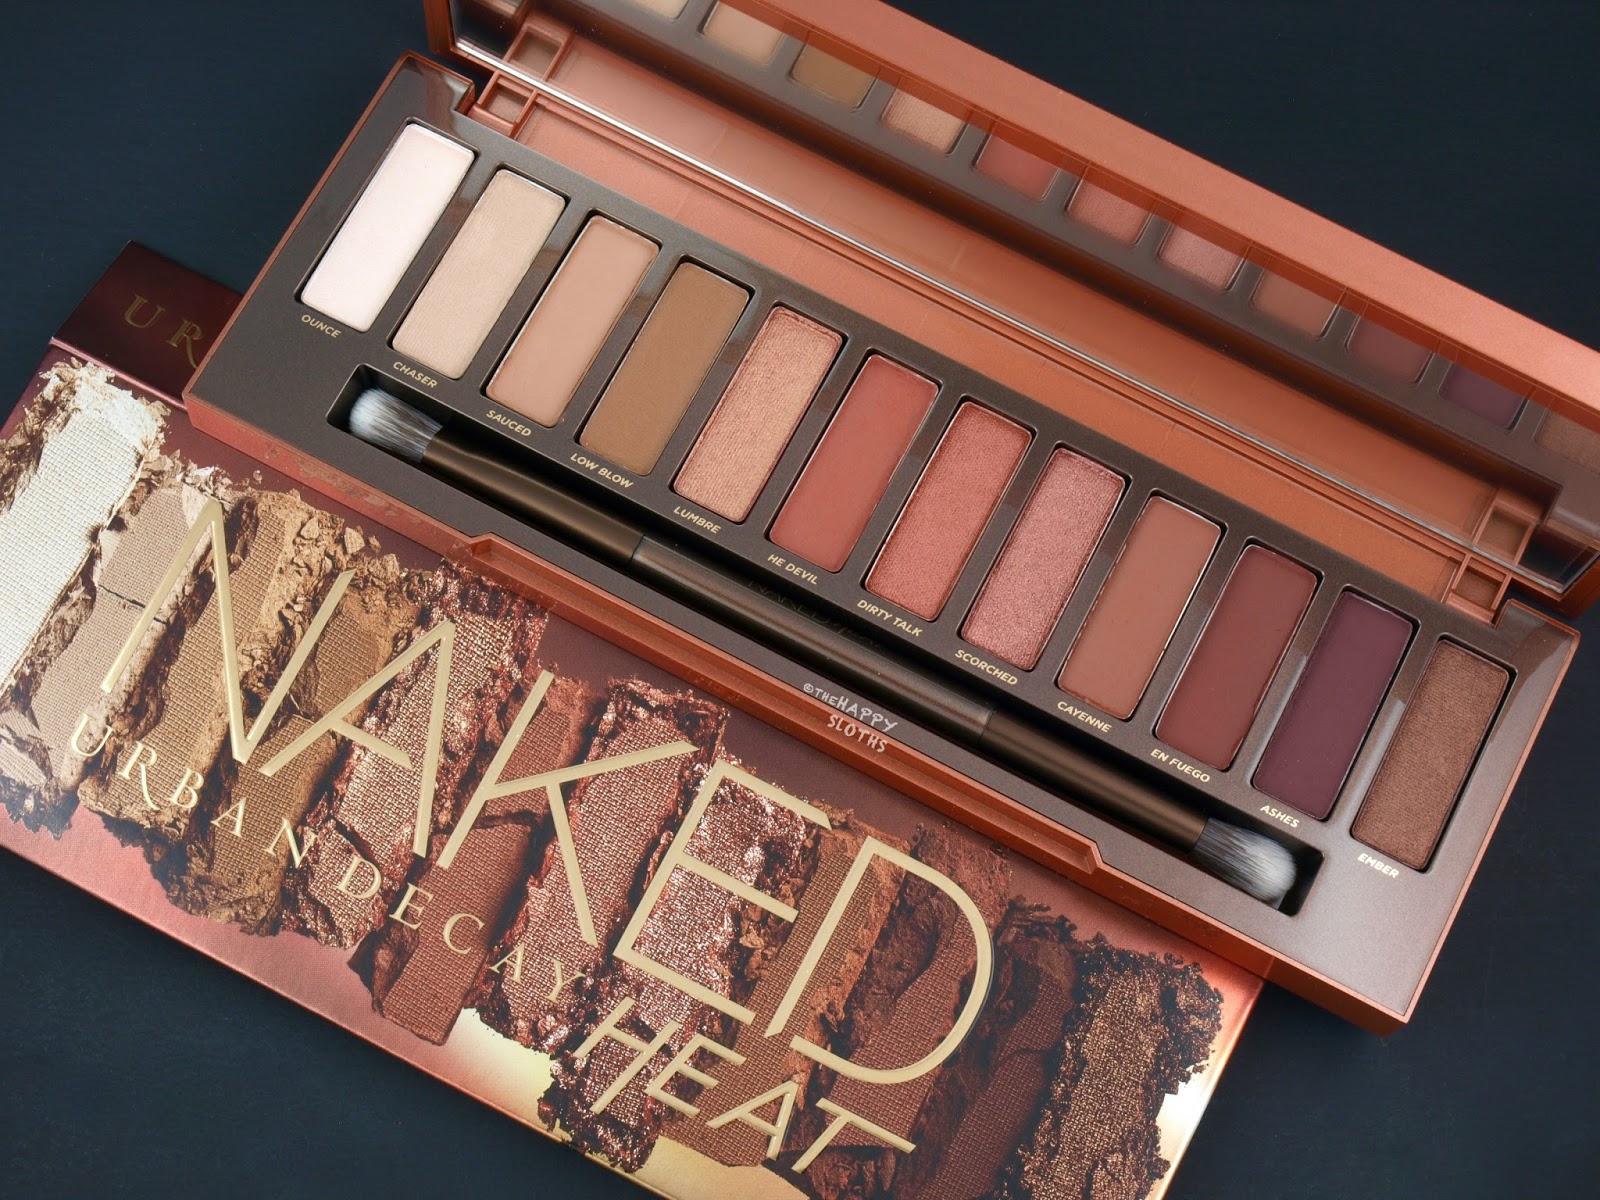 Urban Decay Naked Reloaded Eyeshadow Palette Review 